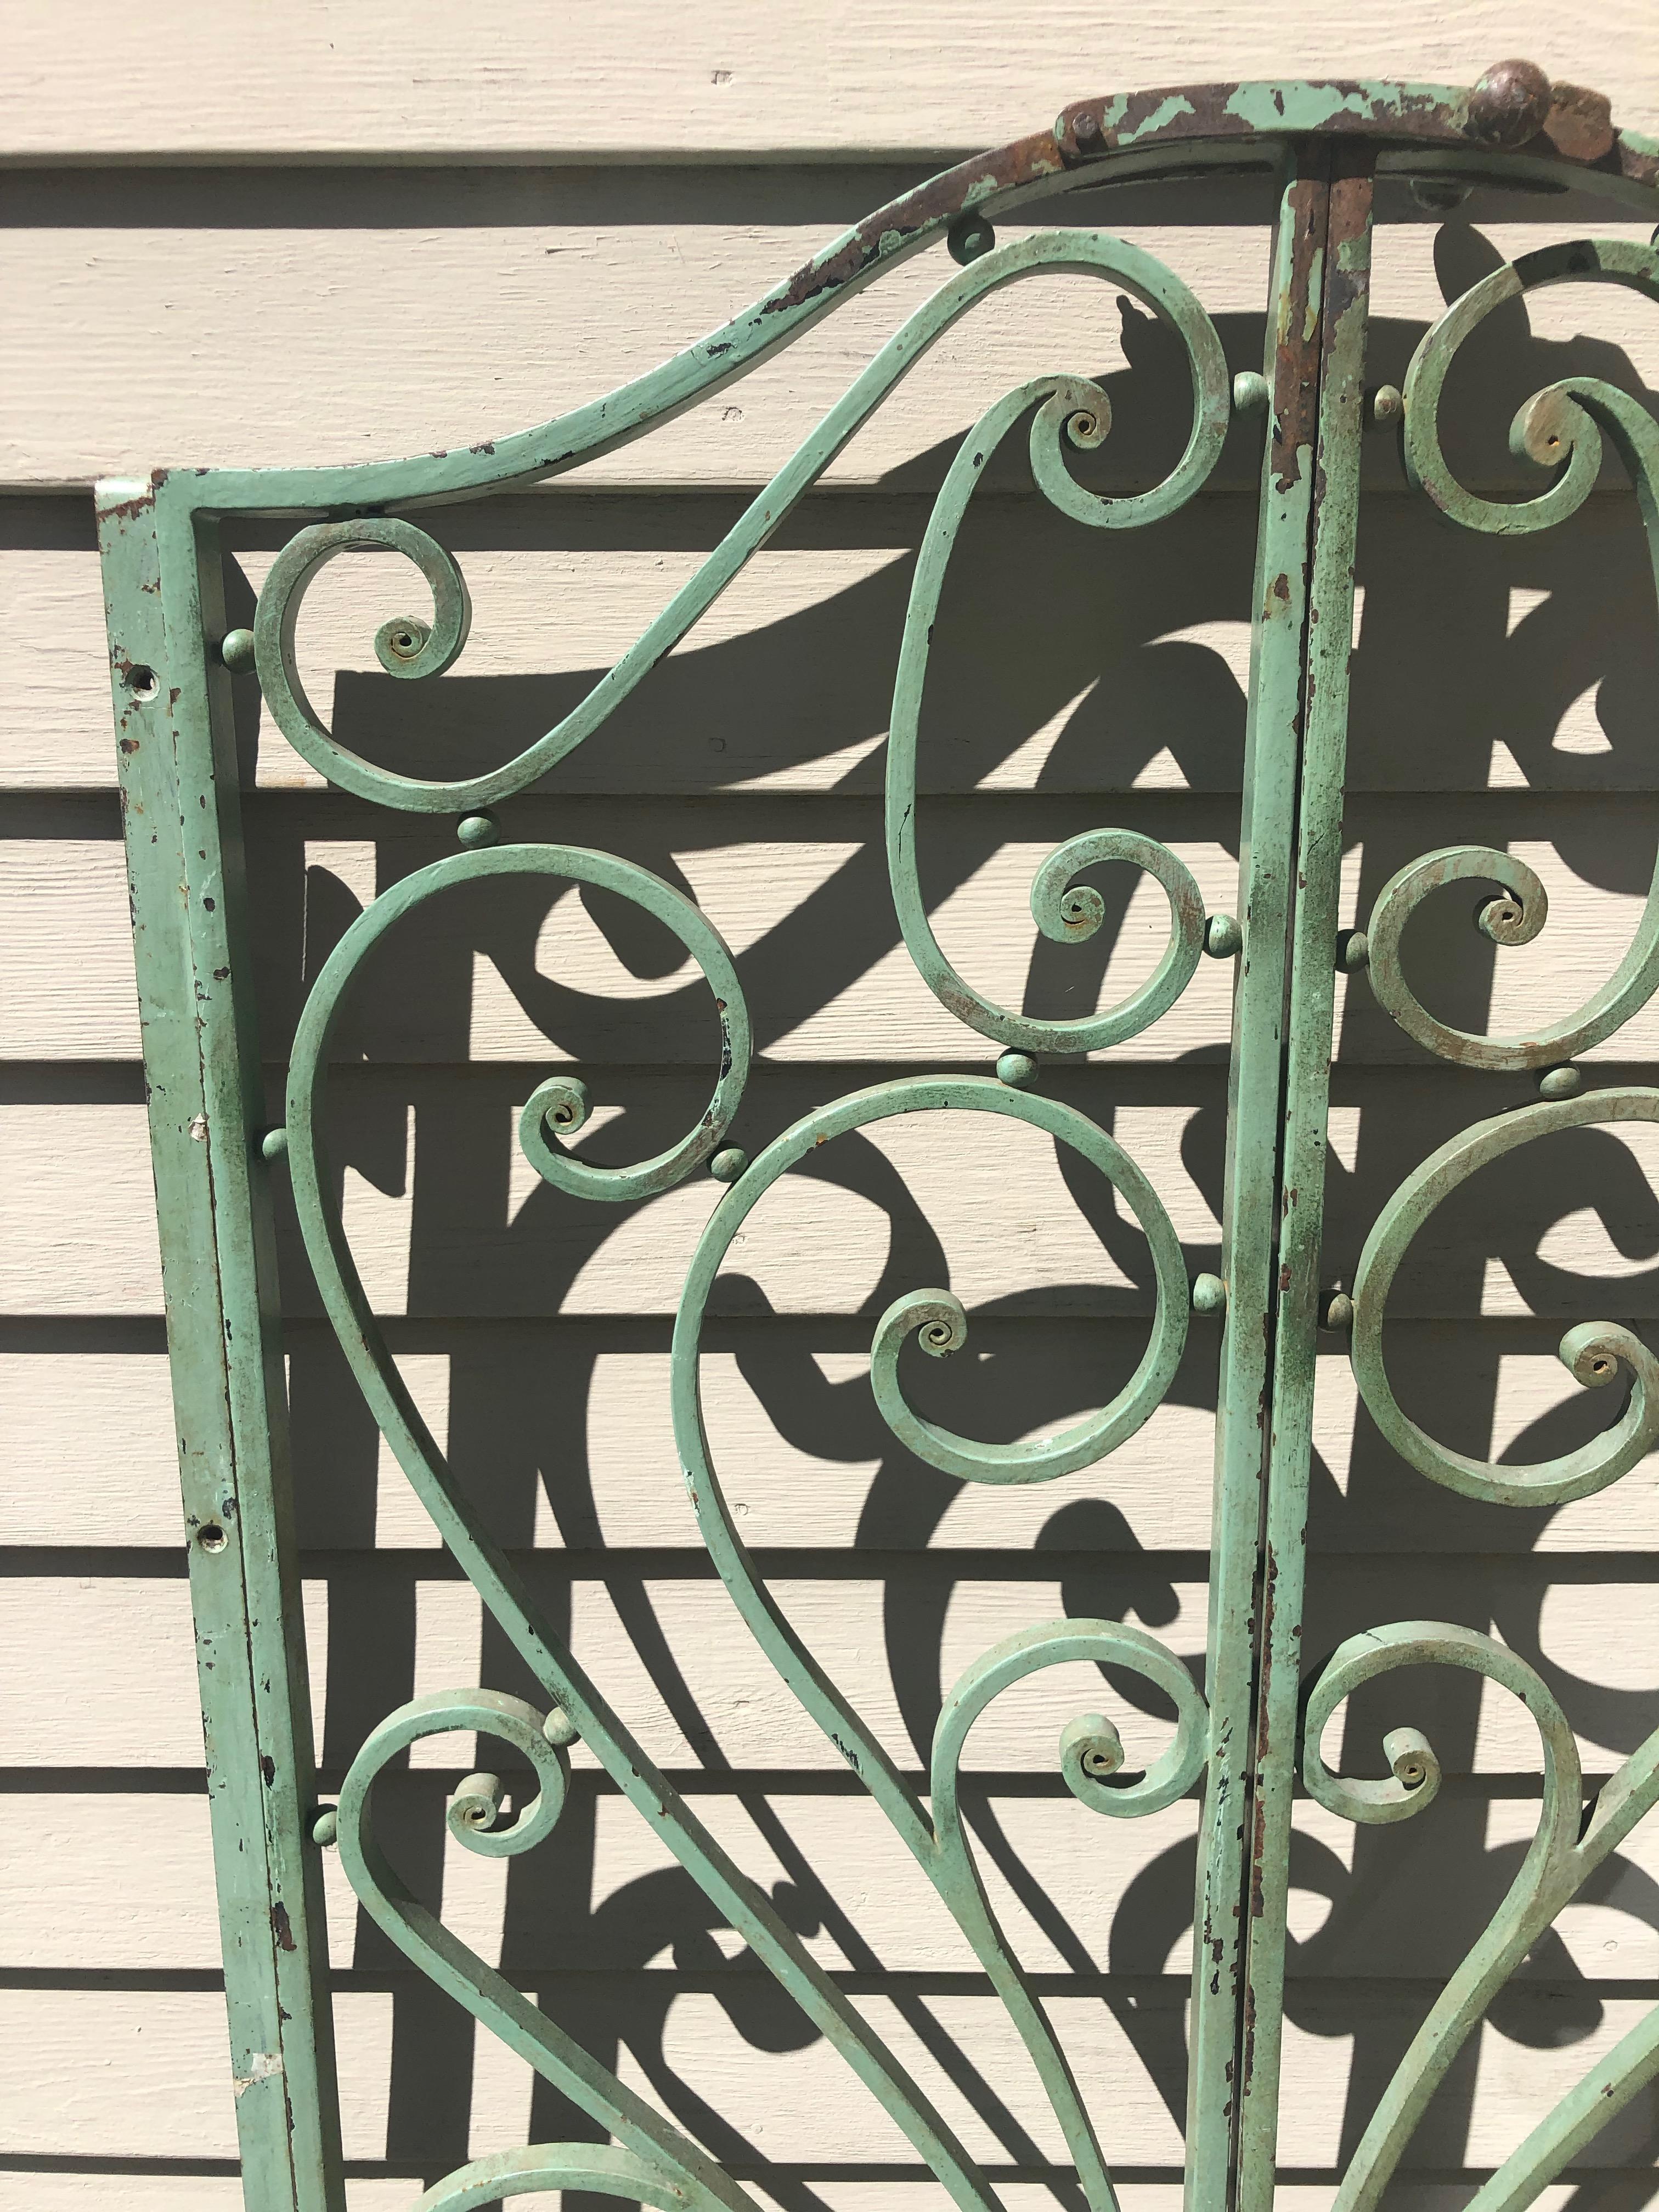 Pair of French Wrought Iron Beaux Arts-Style Gates with Mounting Hardware #1 In Good Condition In Woodbury, CT